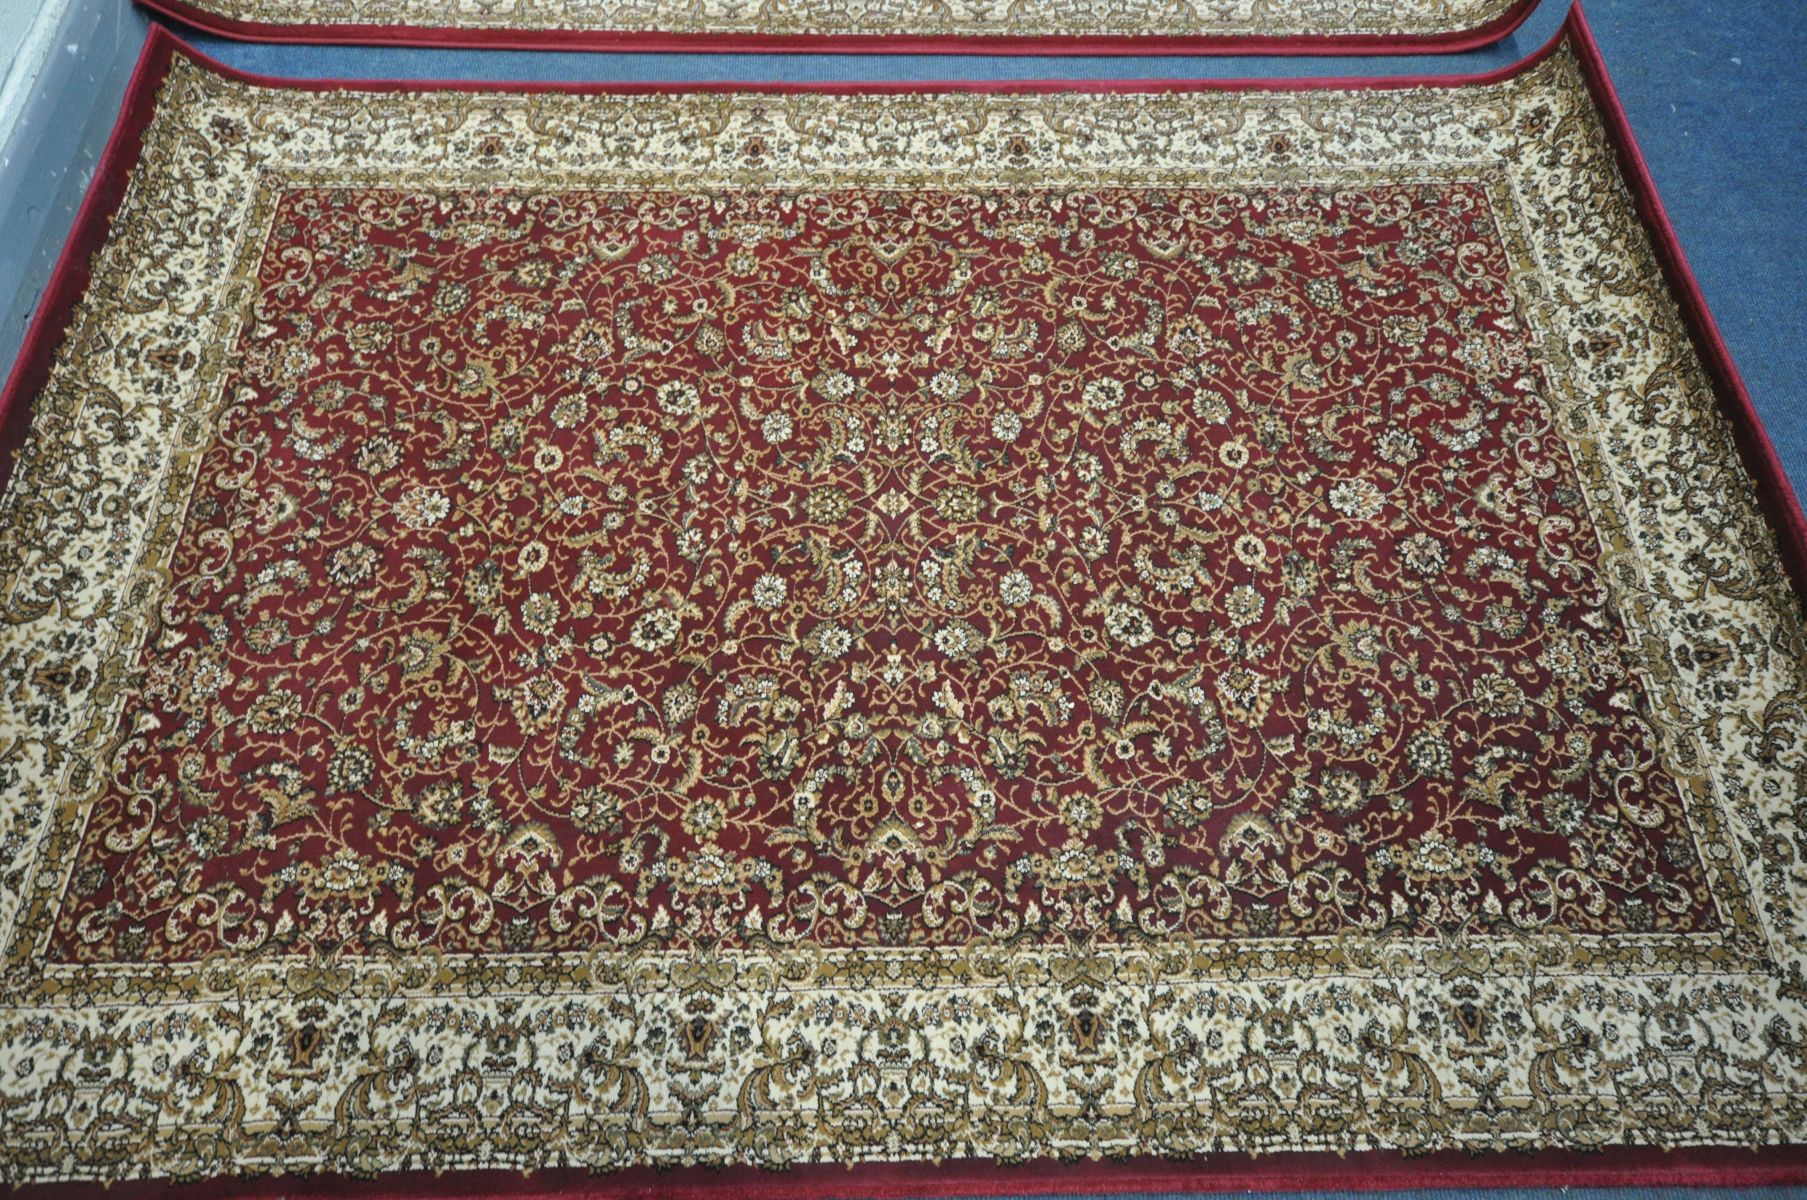 TWO LATE 20TH CENTURY RED AND CREAM ORIENTAL RUGS, made by Dunelm, 230cm x 160cm - Image 2 of 5